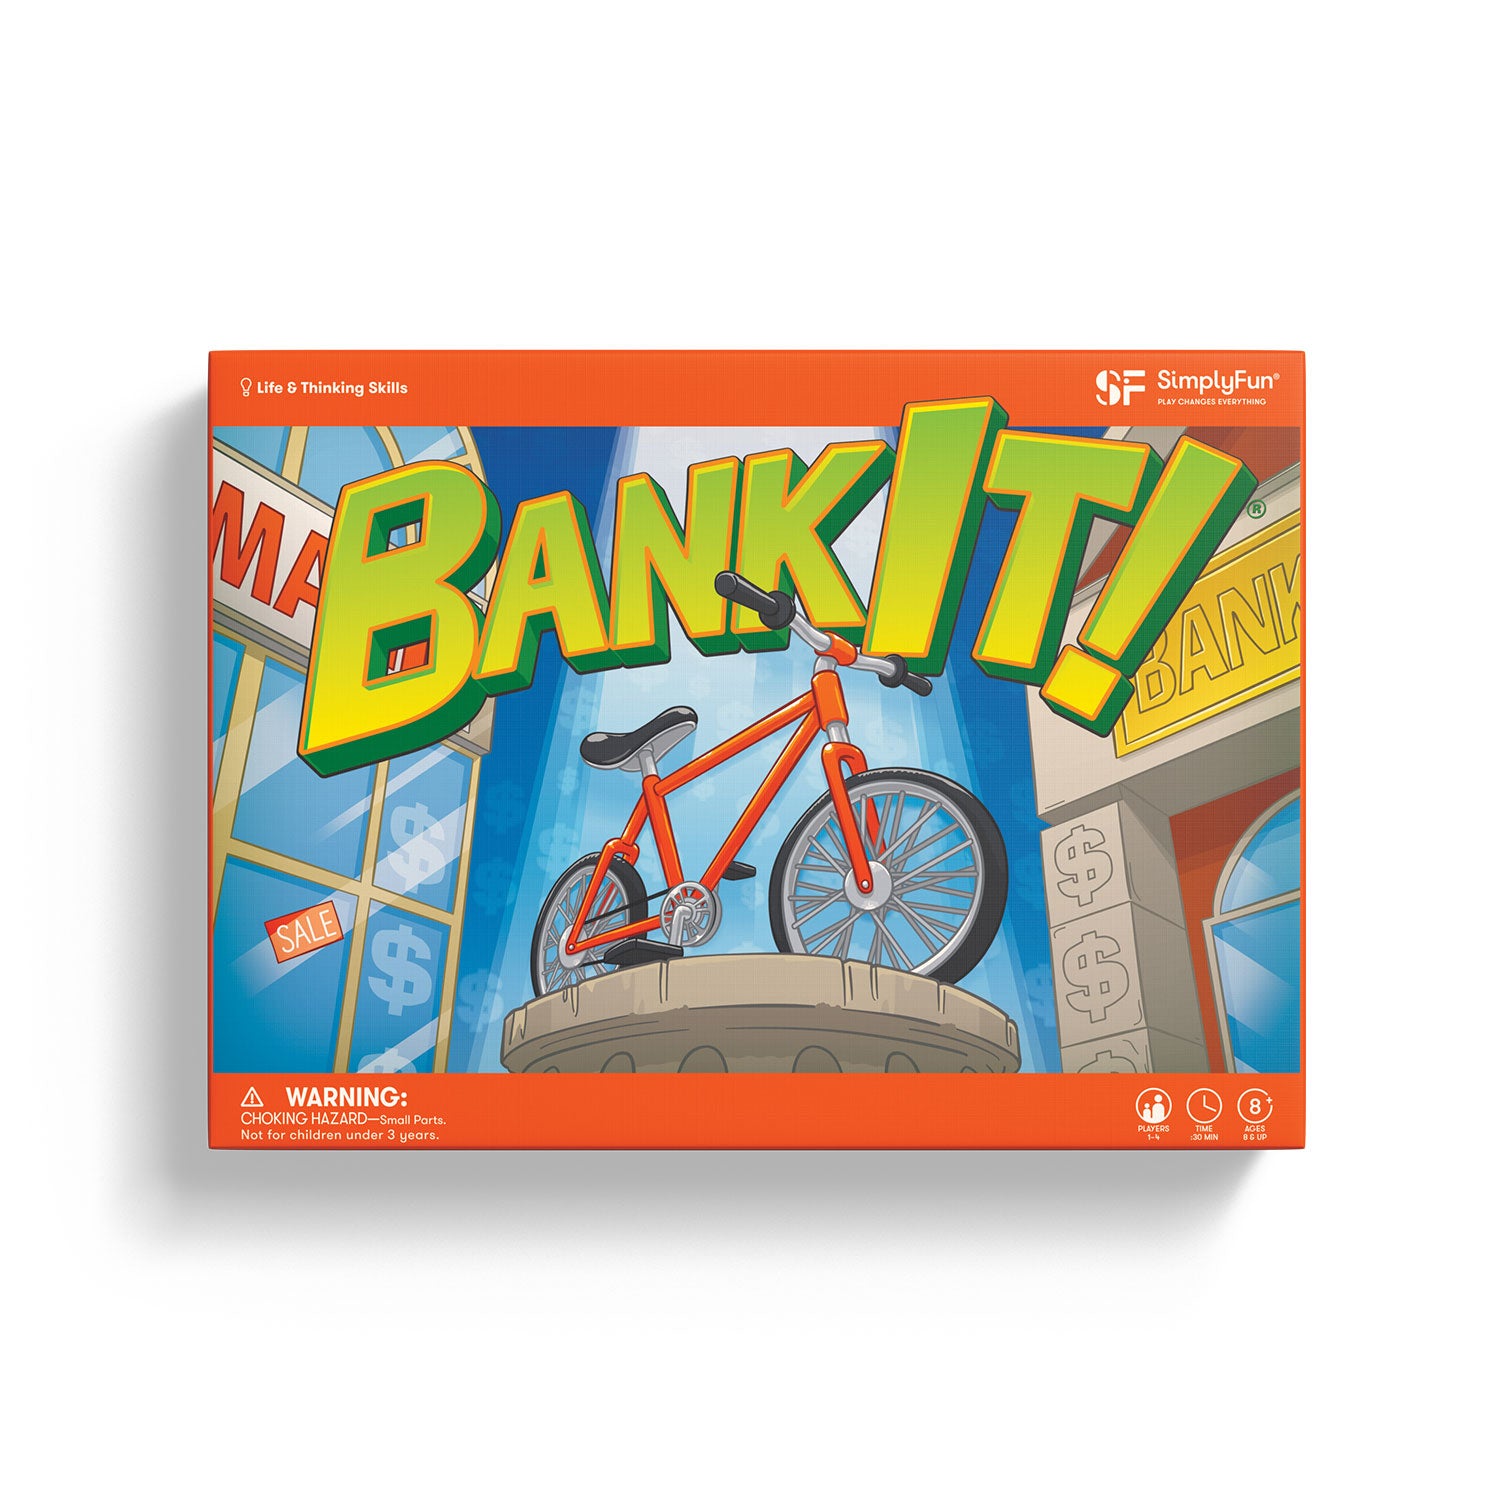 BankIt! by SimplyFun is fun money game for ages 8 and up